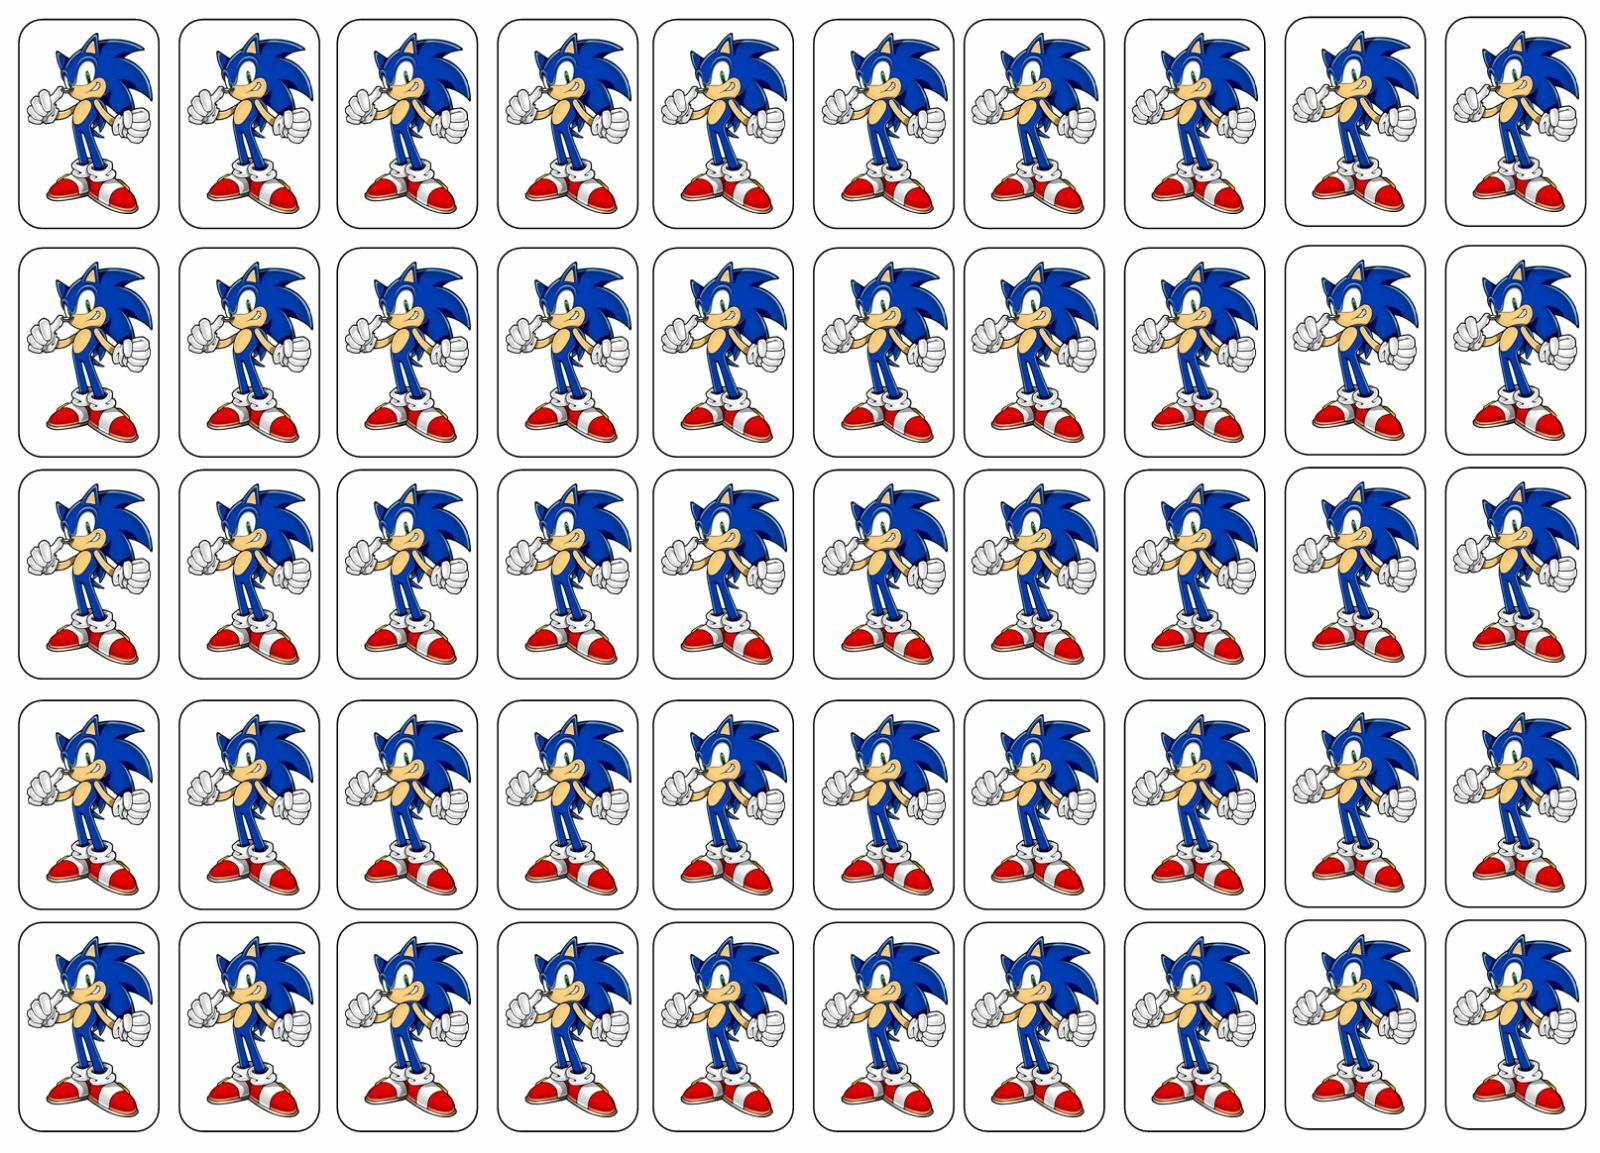 50 Sonic The Hedgehog Envelope Seals / Labels / Stickers, 1" By 1.5"